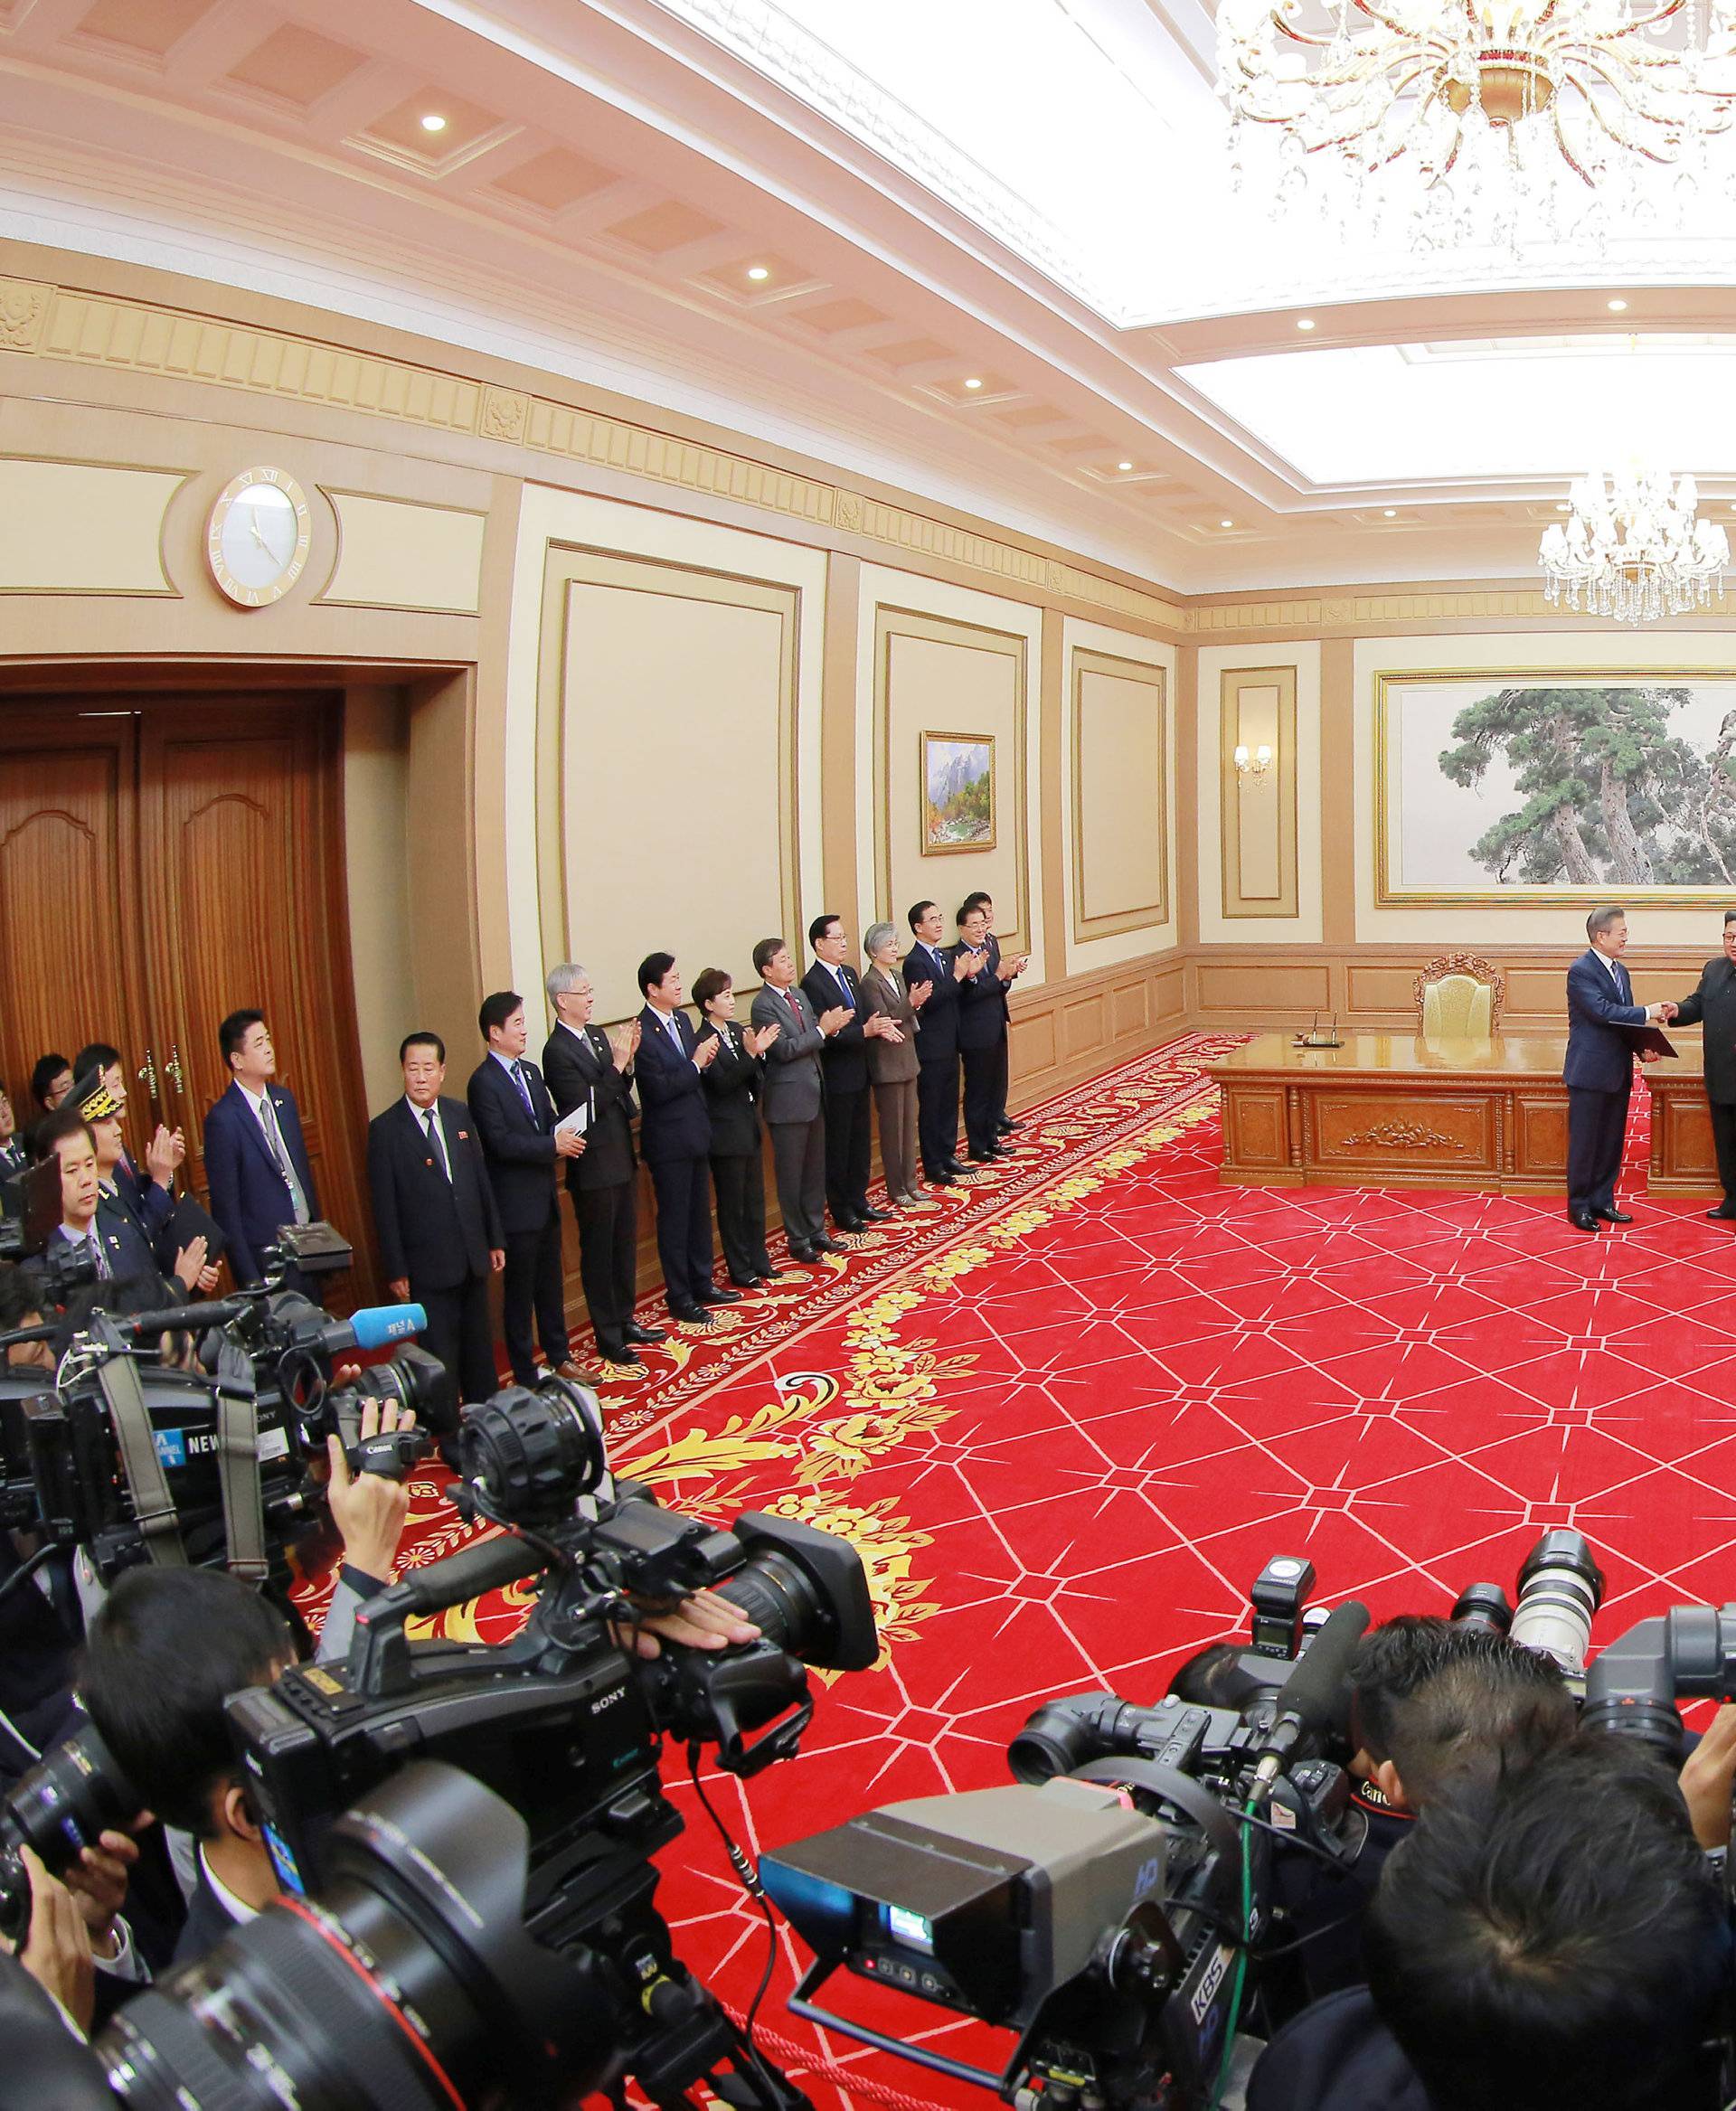 South Korean President Moon Jae-in and North Korean leader Kim Jong Un shake hands after signing a joint statement in Pyongyang in this photo released by North Korea's Korean Central News Agency